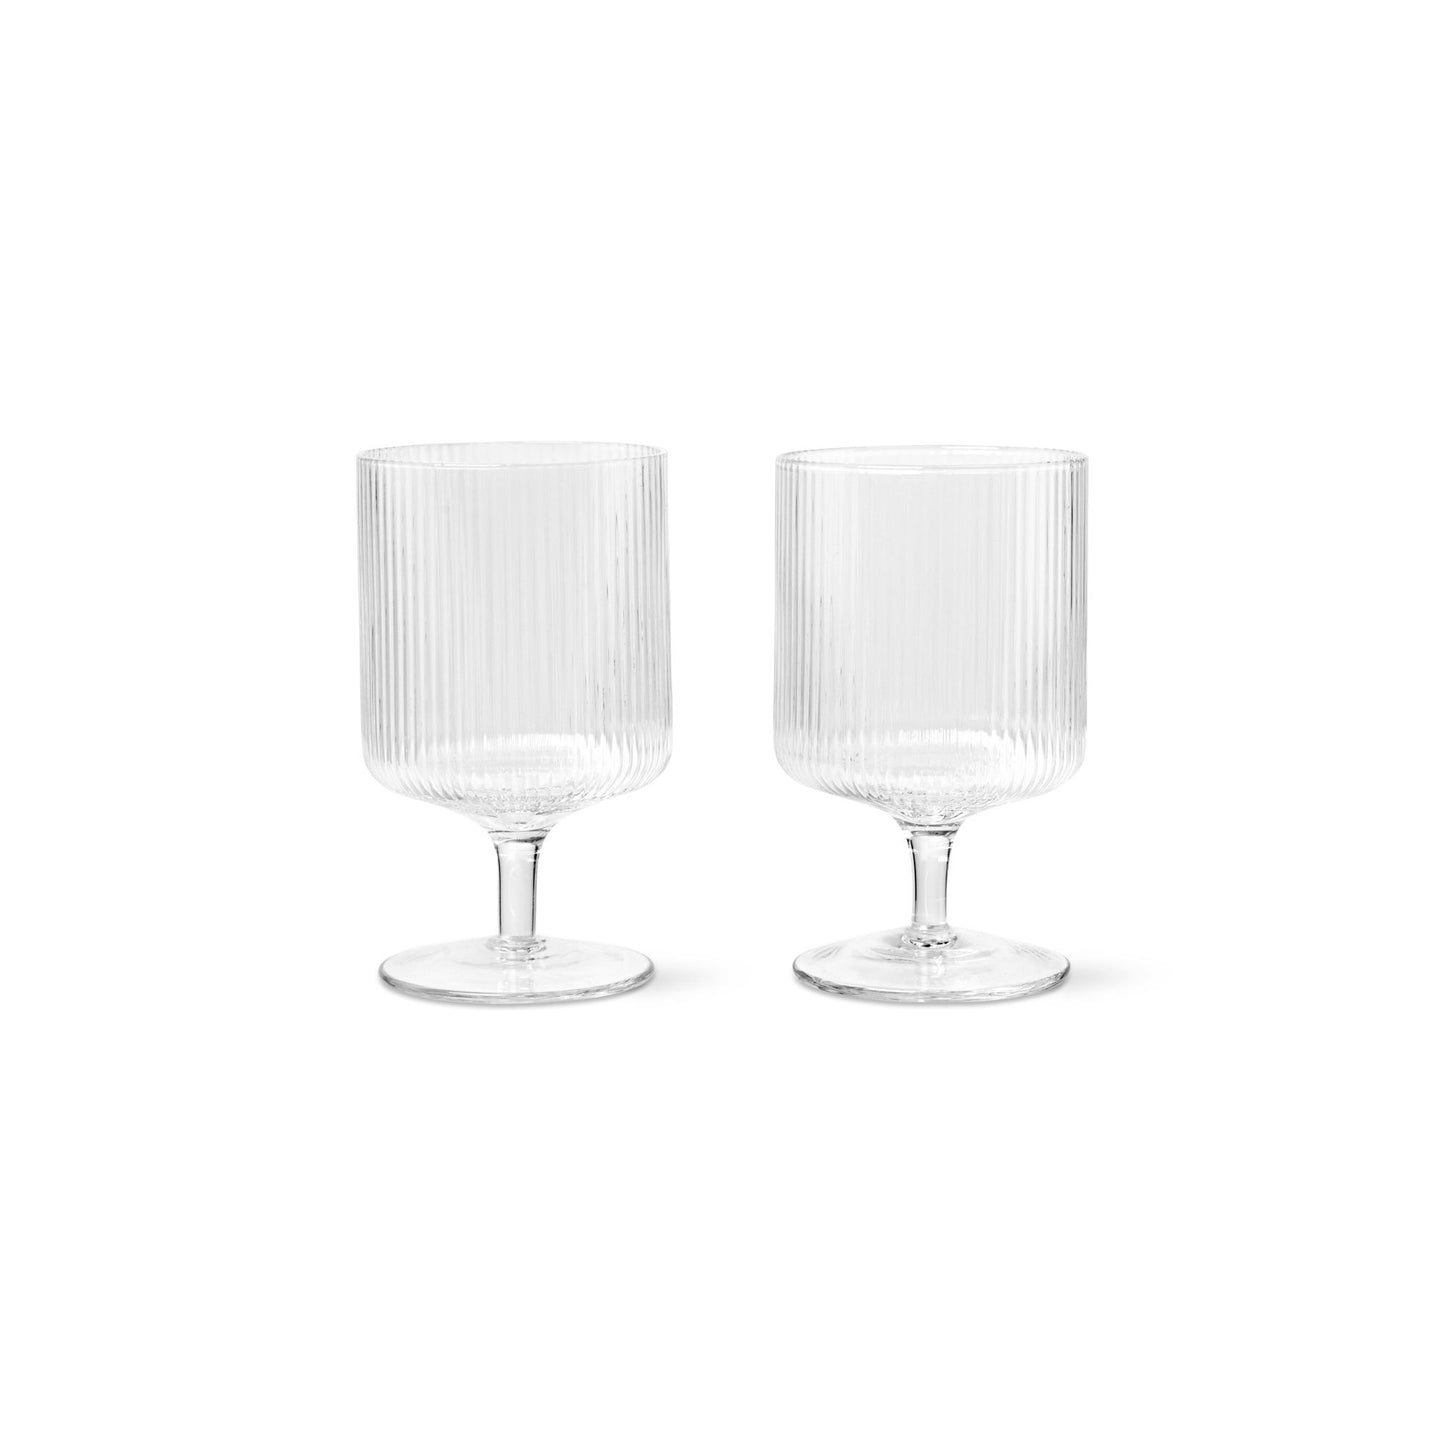 Ripple Wine Glass Set of 2 by Ferm Living #Clear